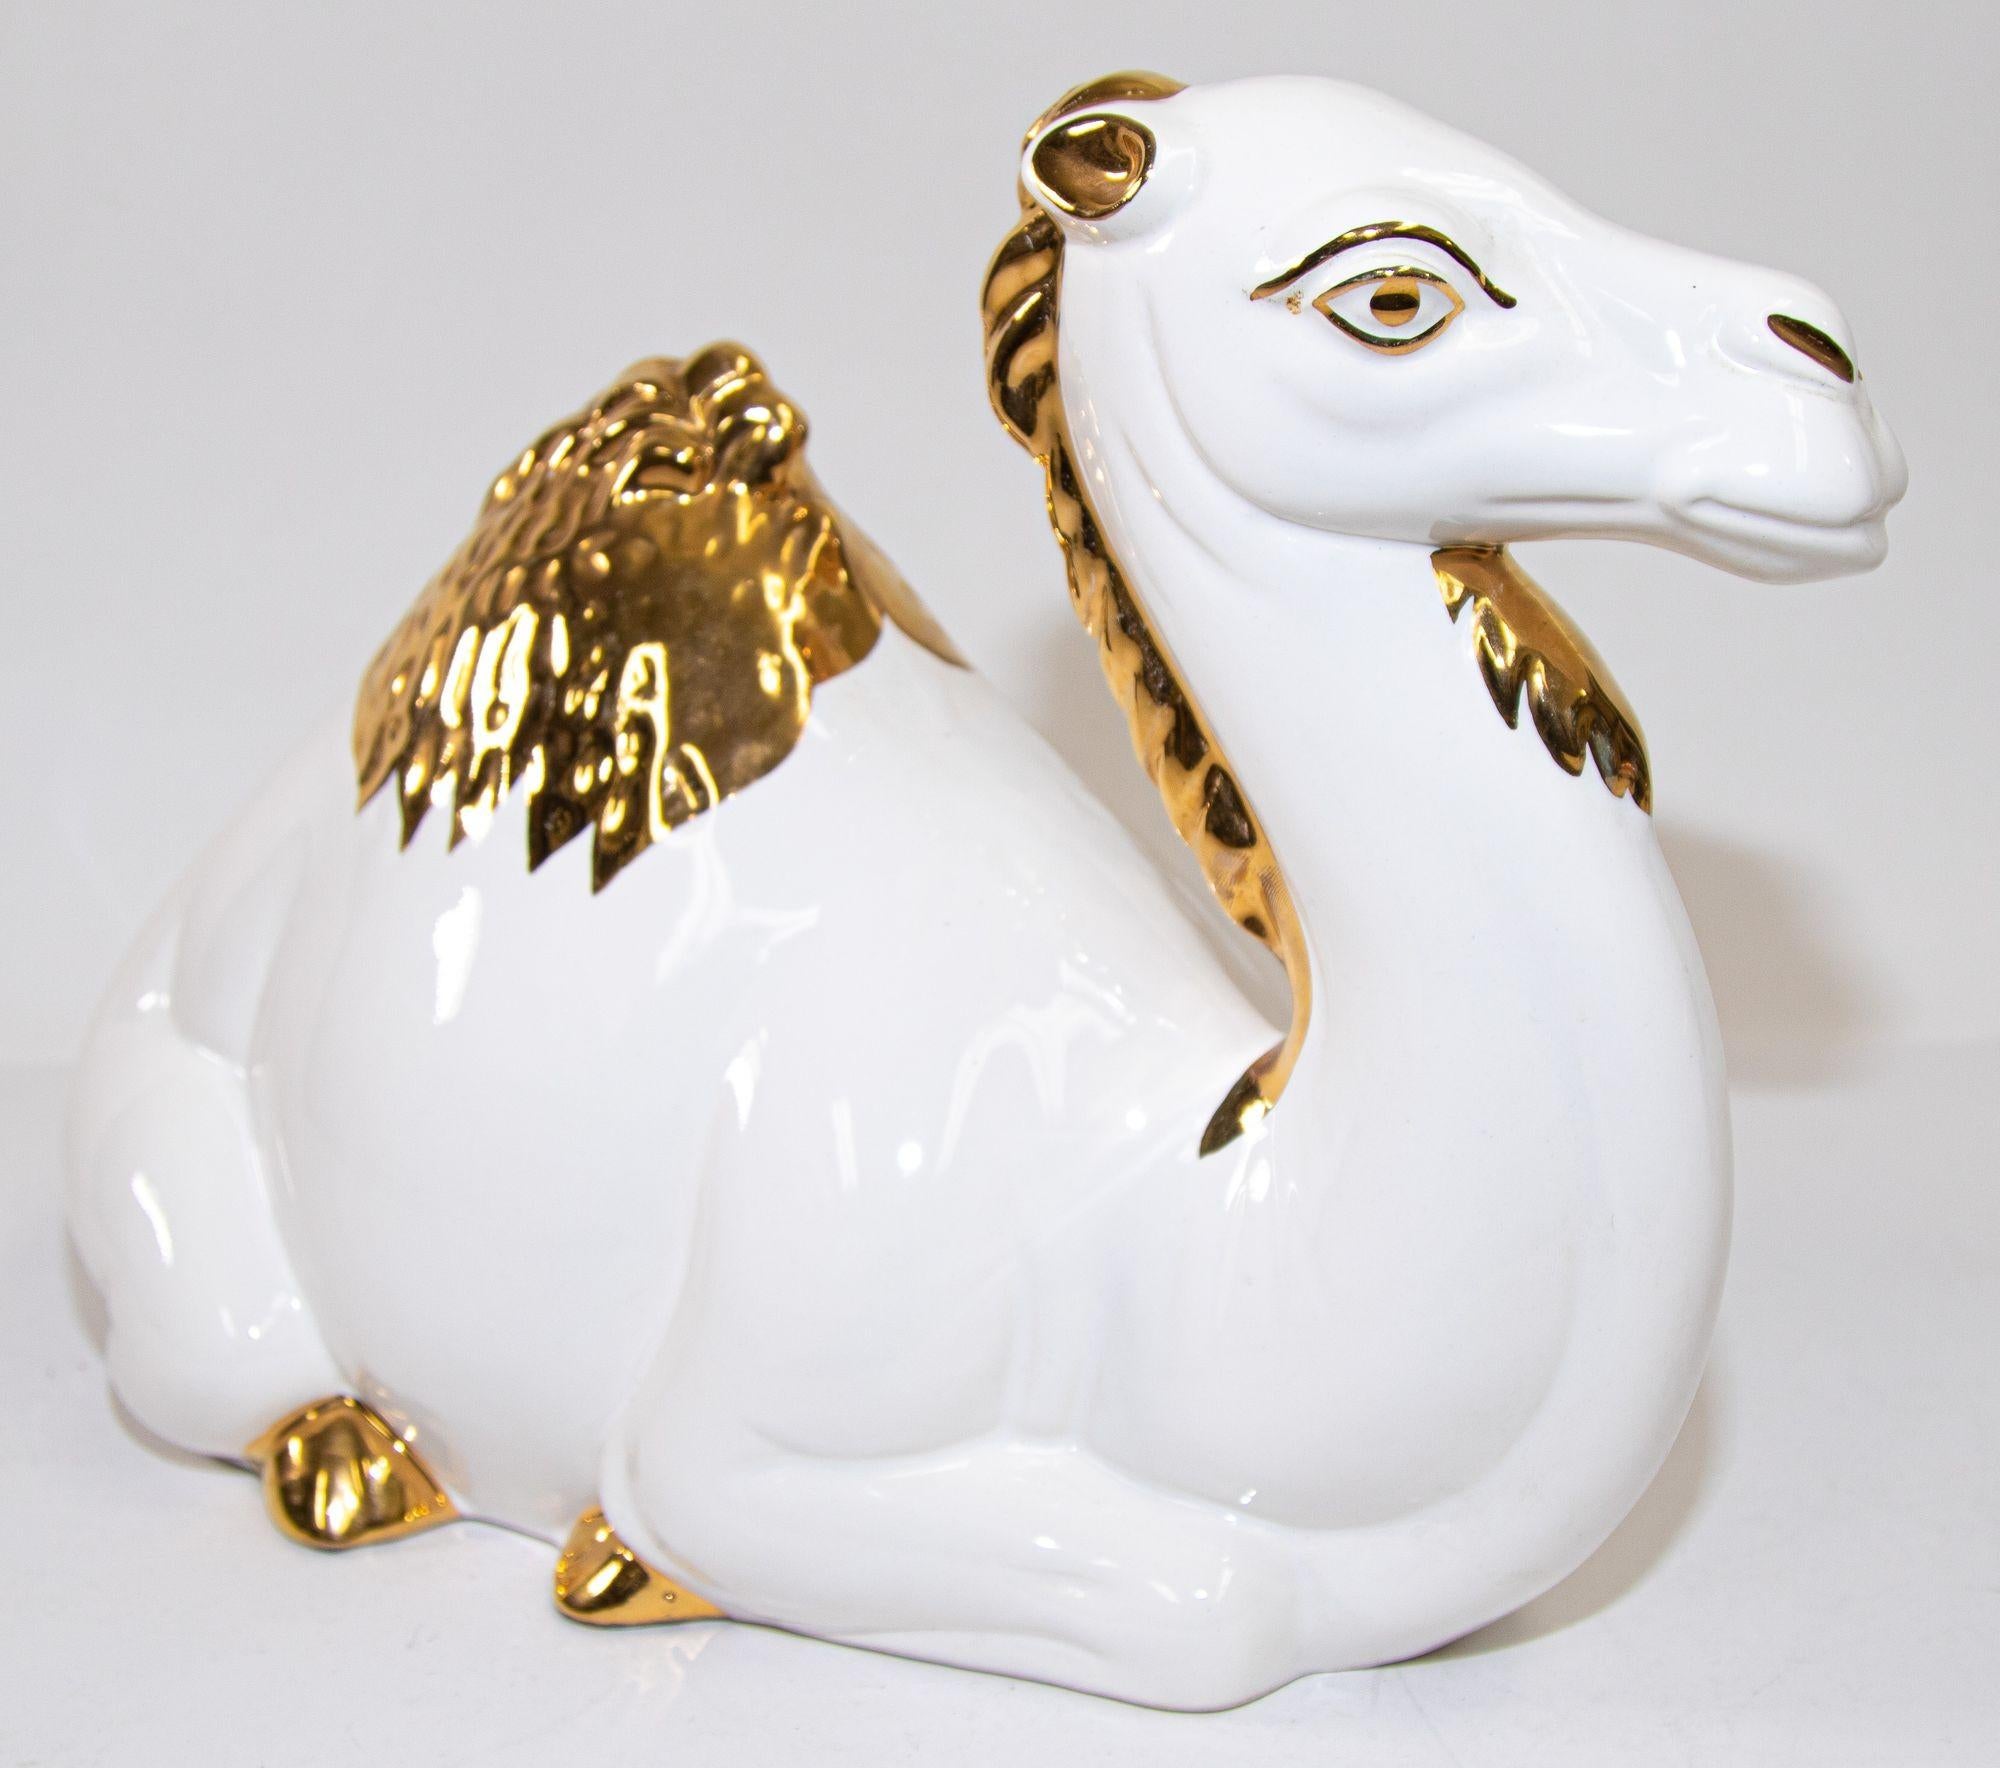 Hand-Crafted Vintage White and Gold Ceramic Camel Sculpture